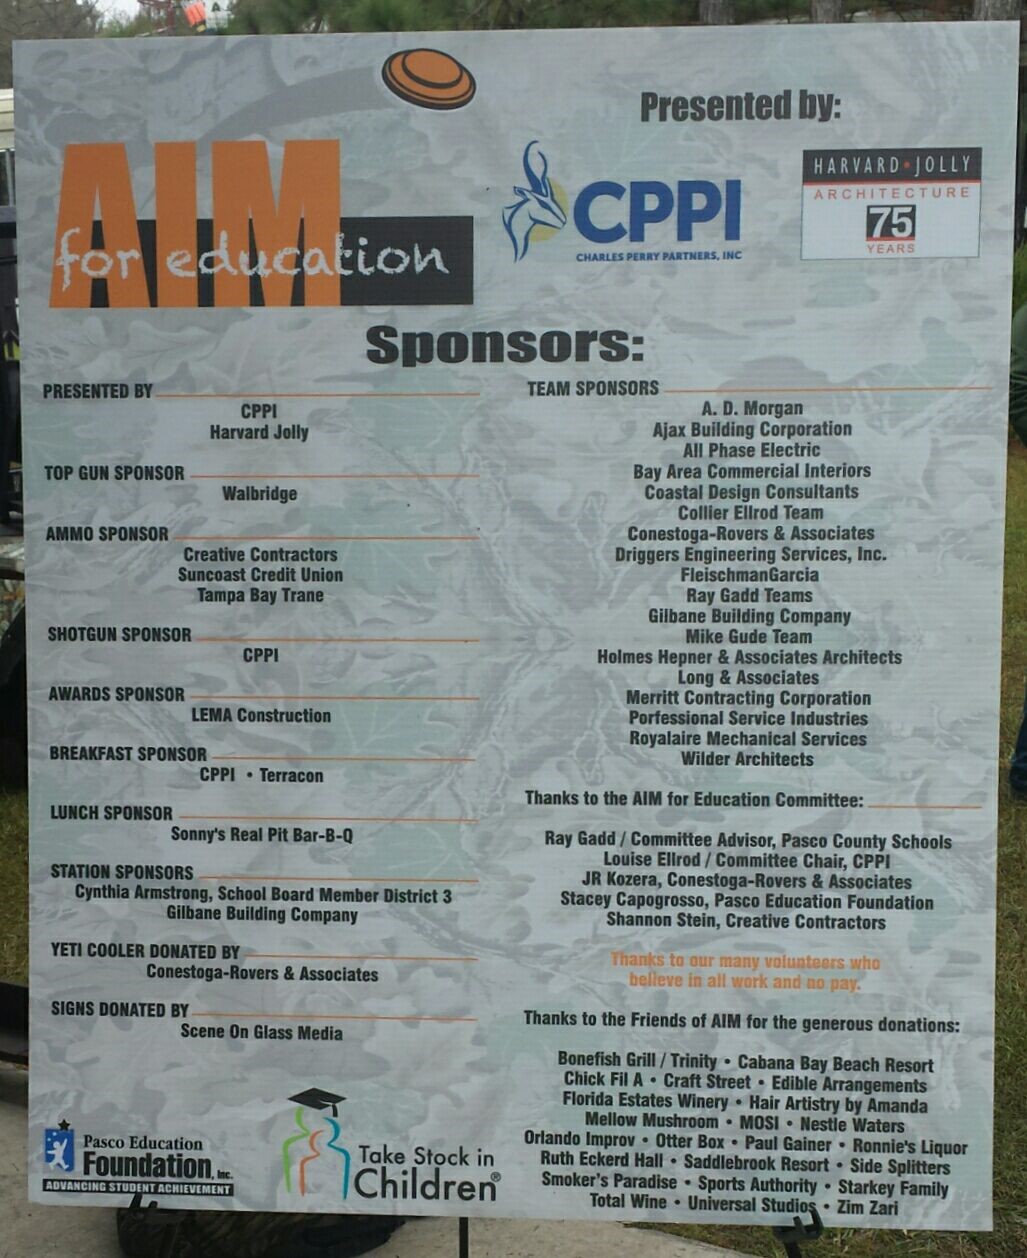 LEMA Construction recognized as one of the proud sponsors of Pasco County AIM for Education